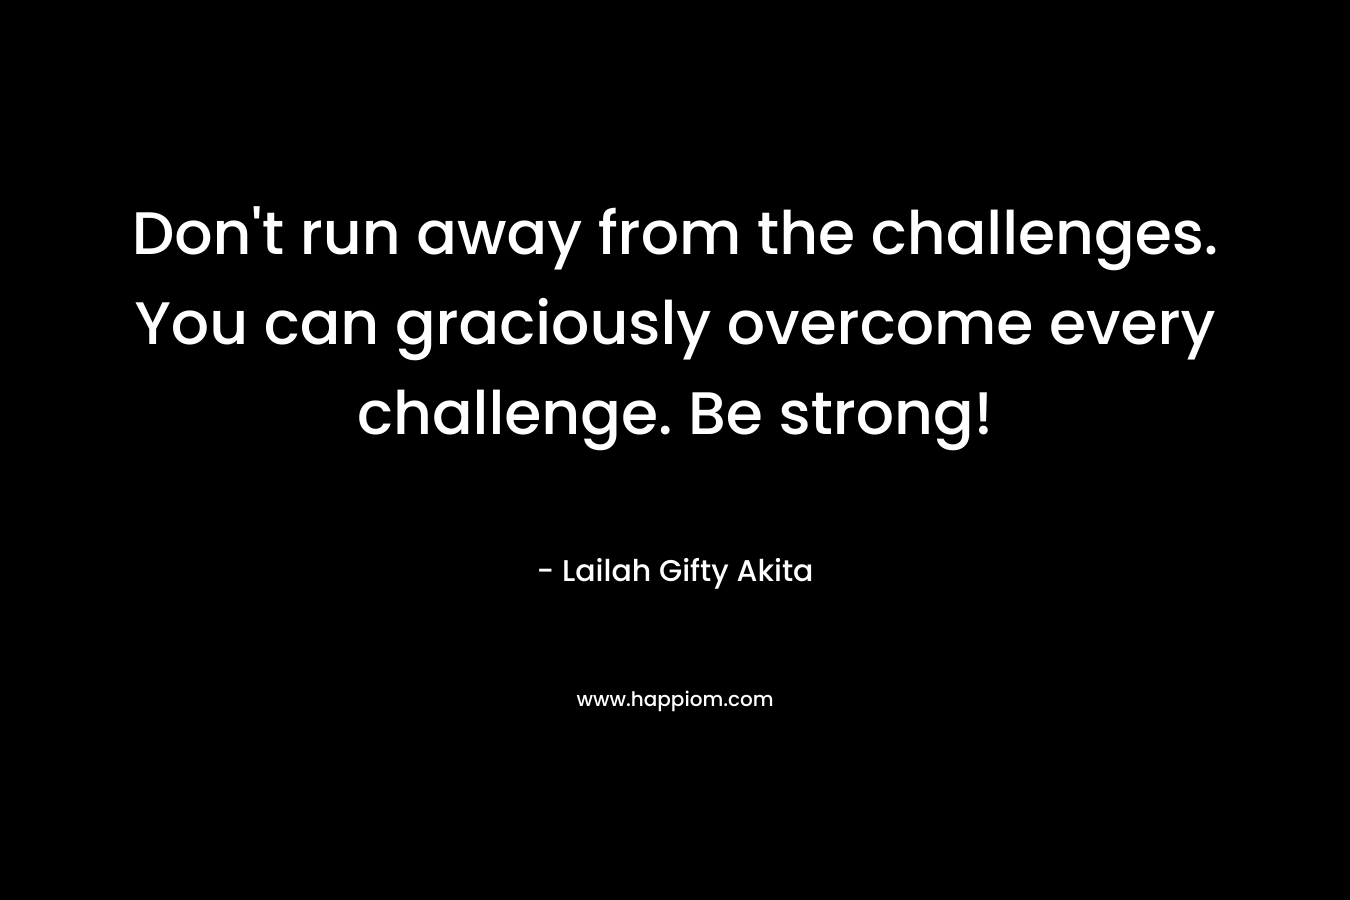 Don't run away from the challenges. You can graciously overcome every challenge. Be strong!